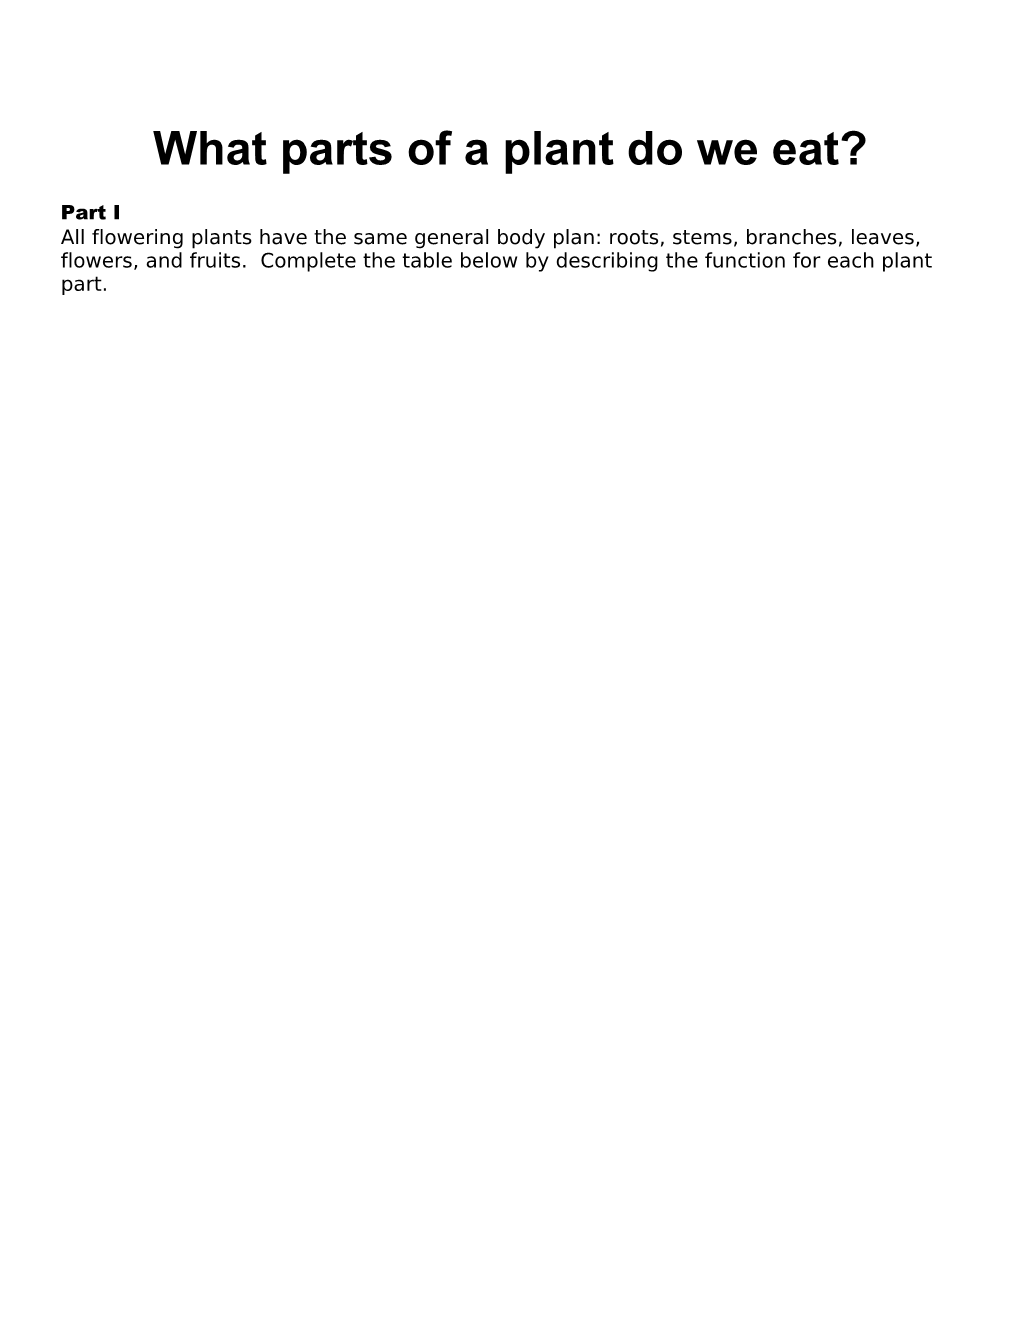 What Parts of a Plant Do We Eat